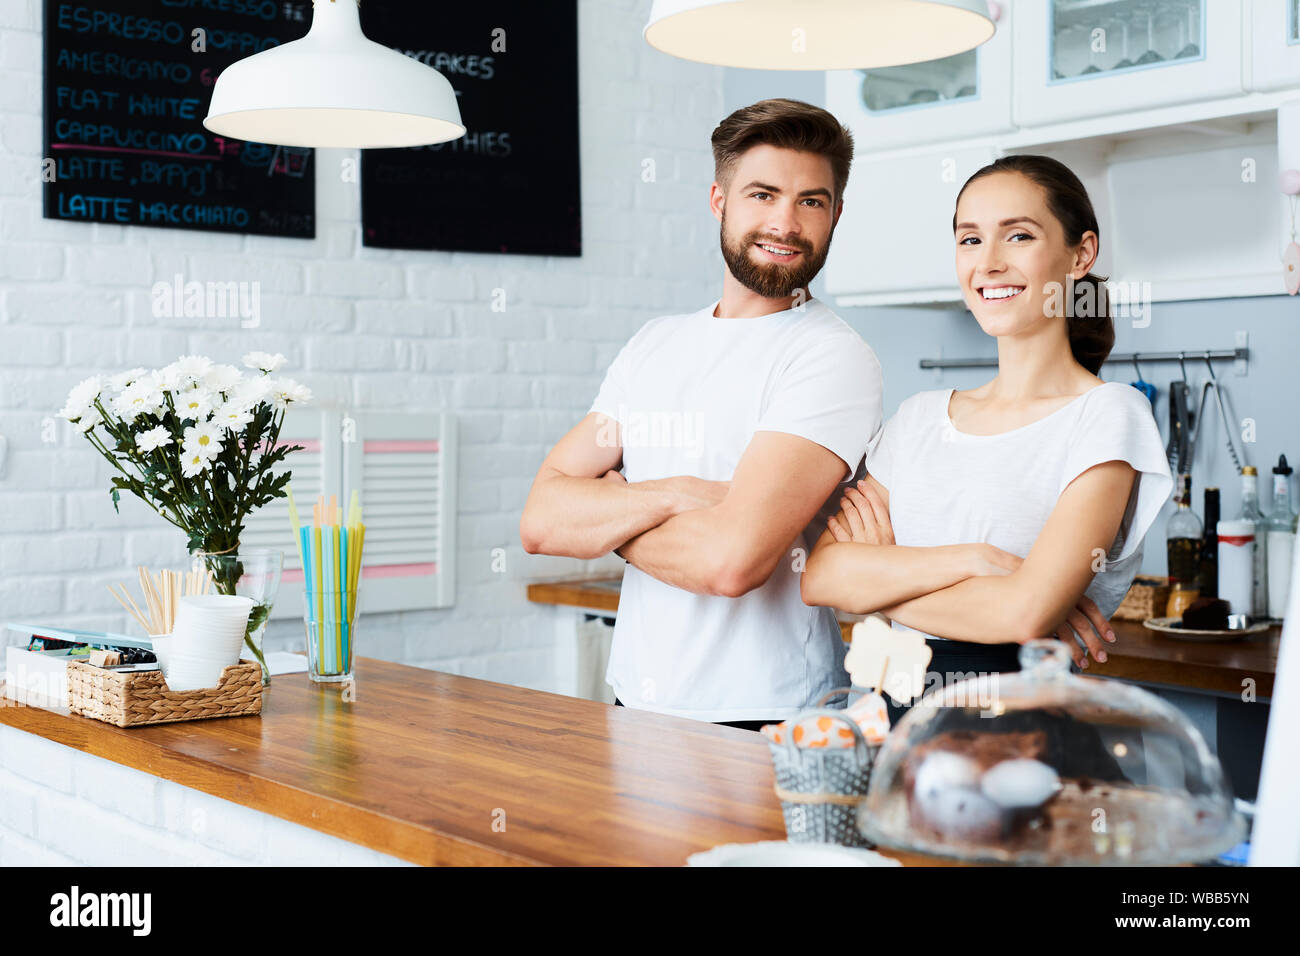 Two cheerful small business owners smiling and looking at camera while standing behind the counter in their restaurant Stock Photo